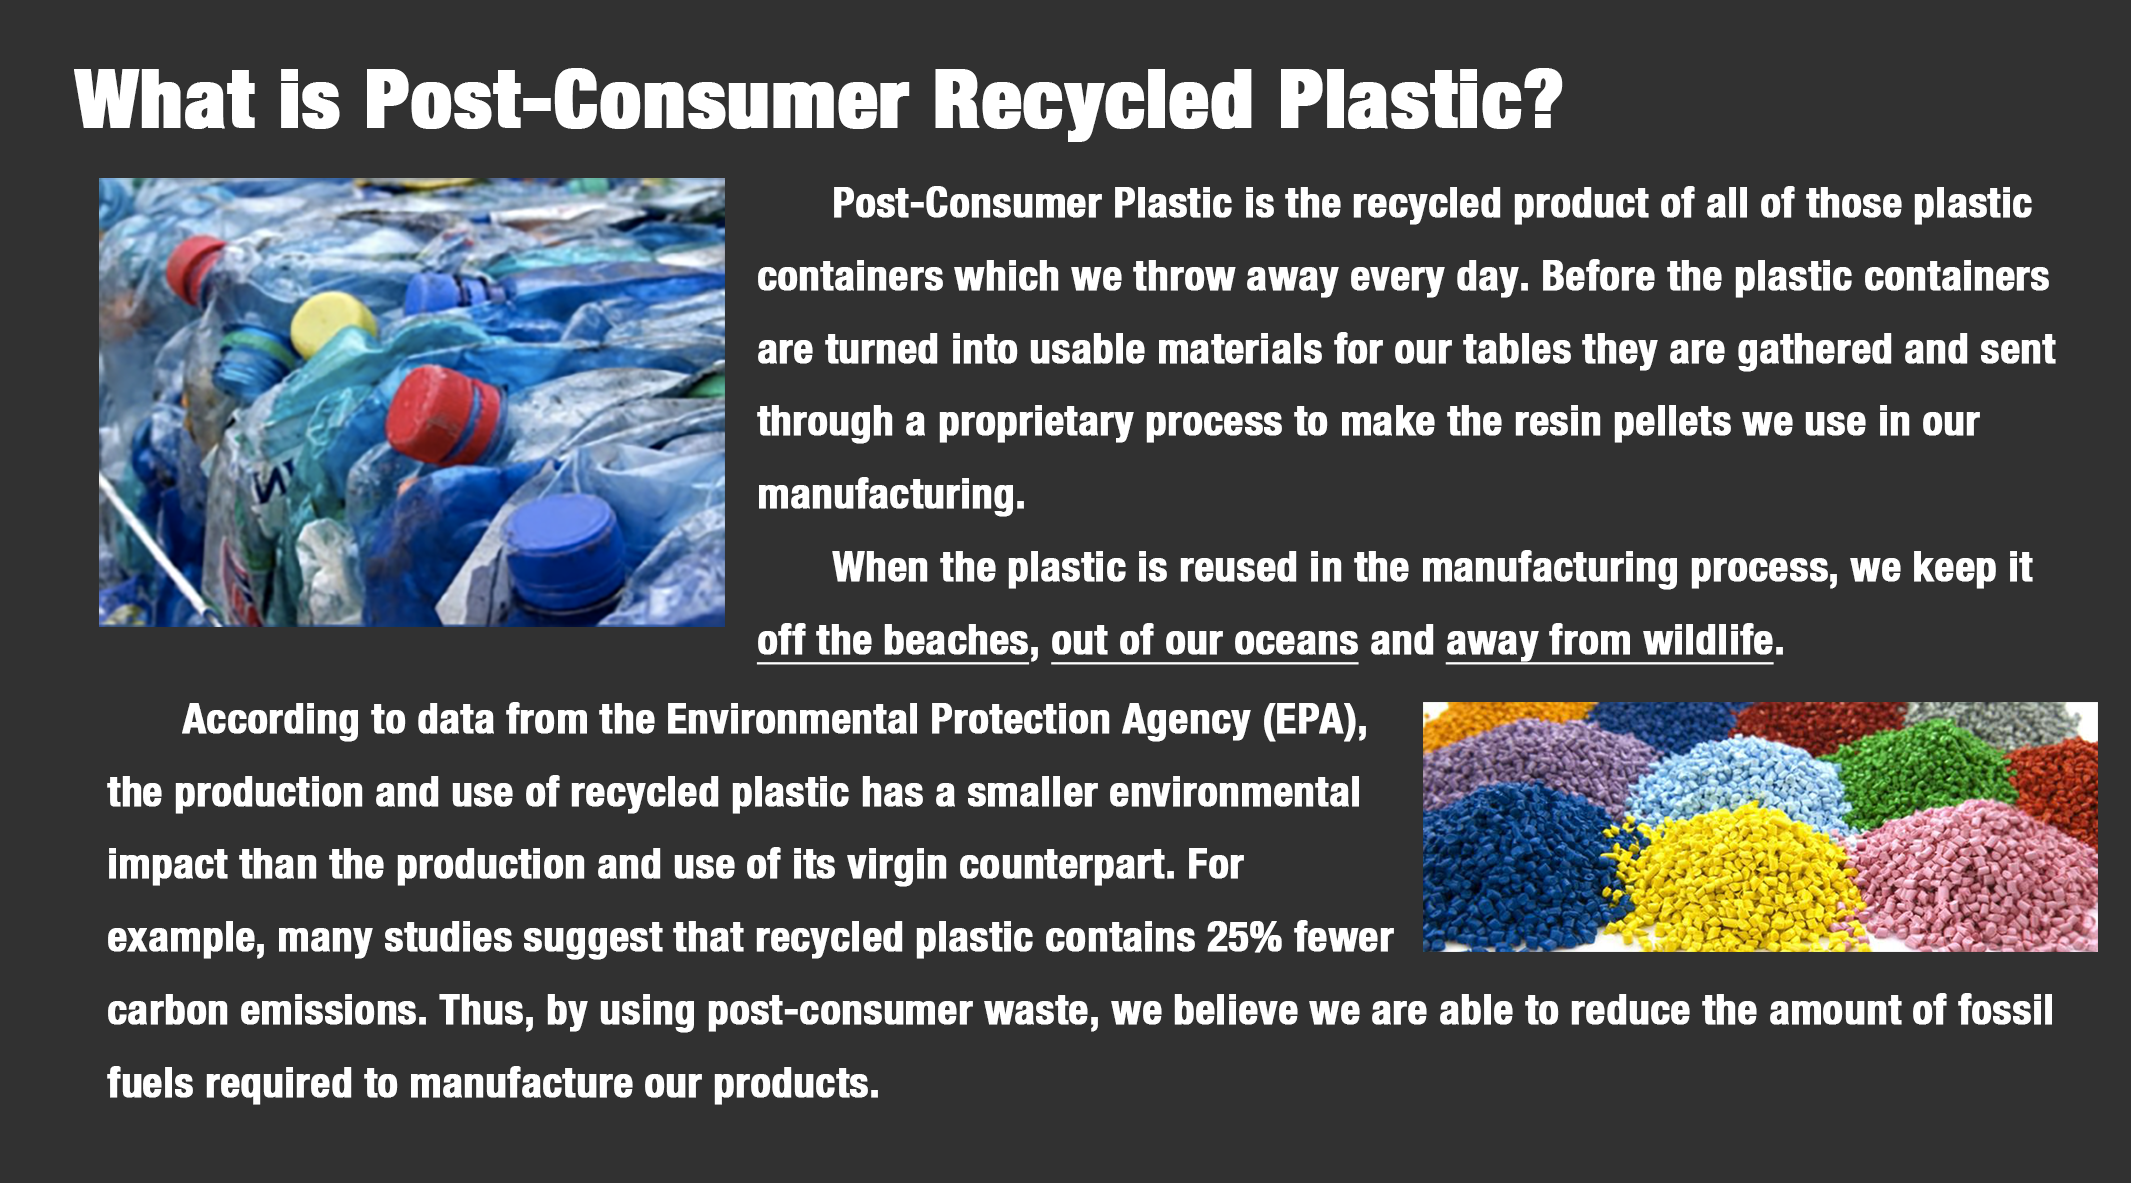 Post-Consumer Plastic is the recycled product of all of those plastic containers which we throw away every day. Before the plastic containers are turned into usable materials for our tables they are gathered and sent through a proprietary process to make the resin pellets we use in our  manufacturing. 	When the plastic is reused in the manufacturing process, we keep it off the beaches, out of our oceans and away from wildlife.  	According to data from the Environmental Protection Agency (EPA),  the production and use of recycled plastic has a smaller environmental  impact than the production and use of its virgin counterpart. For  example, many studies suggest that recycled plastic contains 25% fewer  carbon emissions. Thus, by using post-consumer waste, we believe we are able to reduce the amount of fossil  fuels required to manufacture our products.